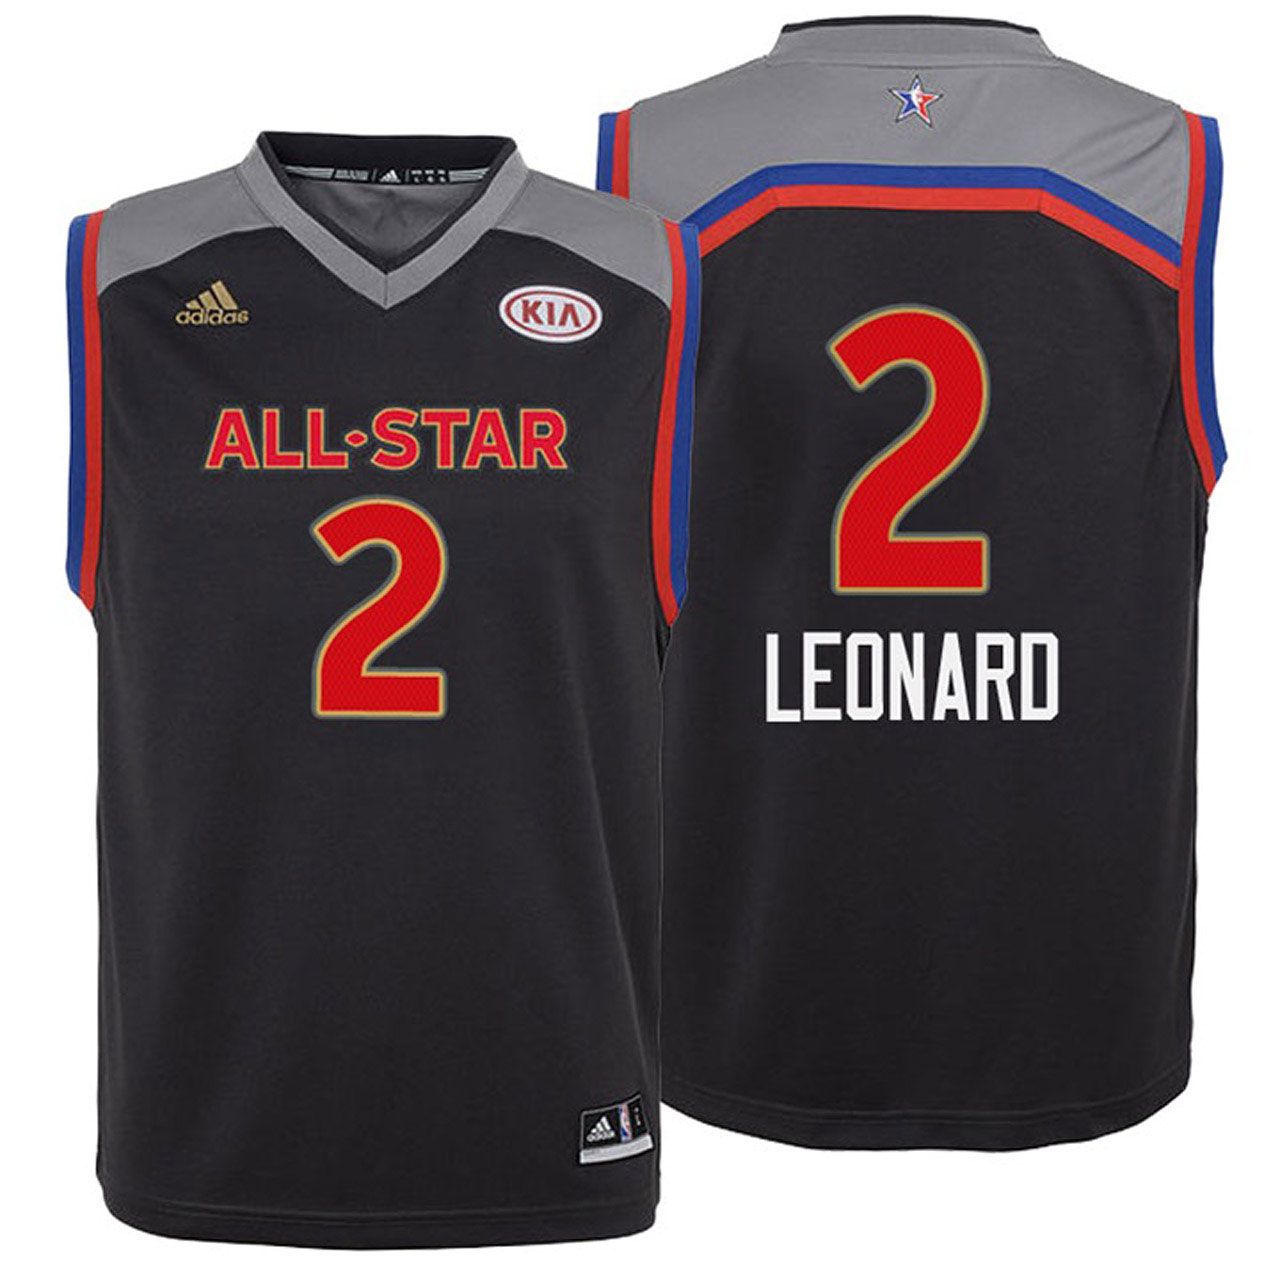 2017 All-Star Youth Spurs Kawhi Leonard #2 Western Conference Charcoal Jersey